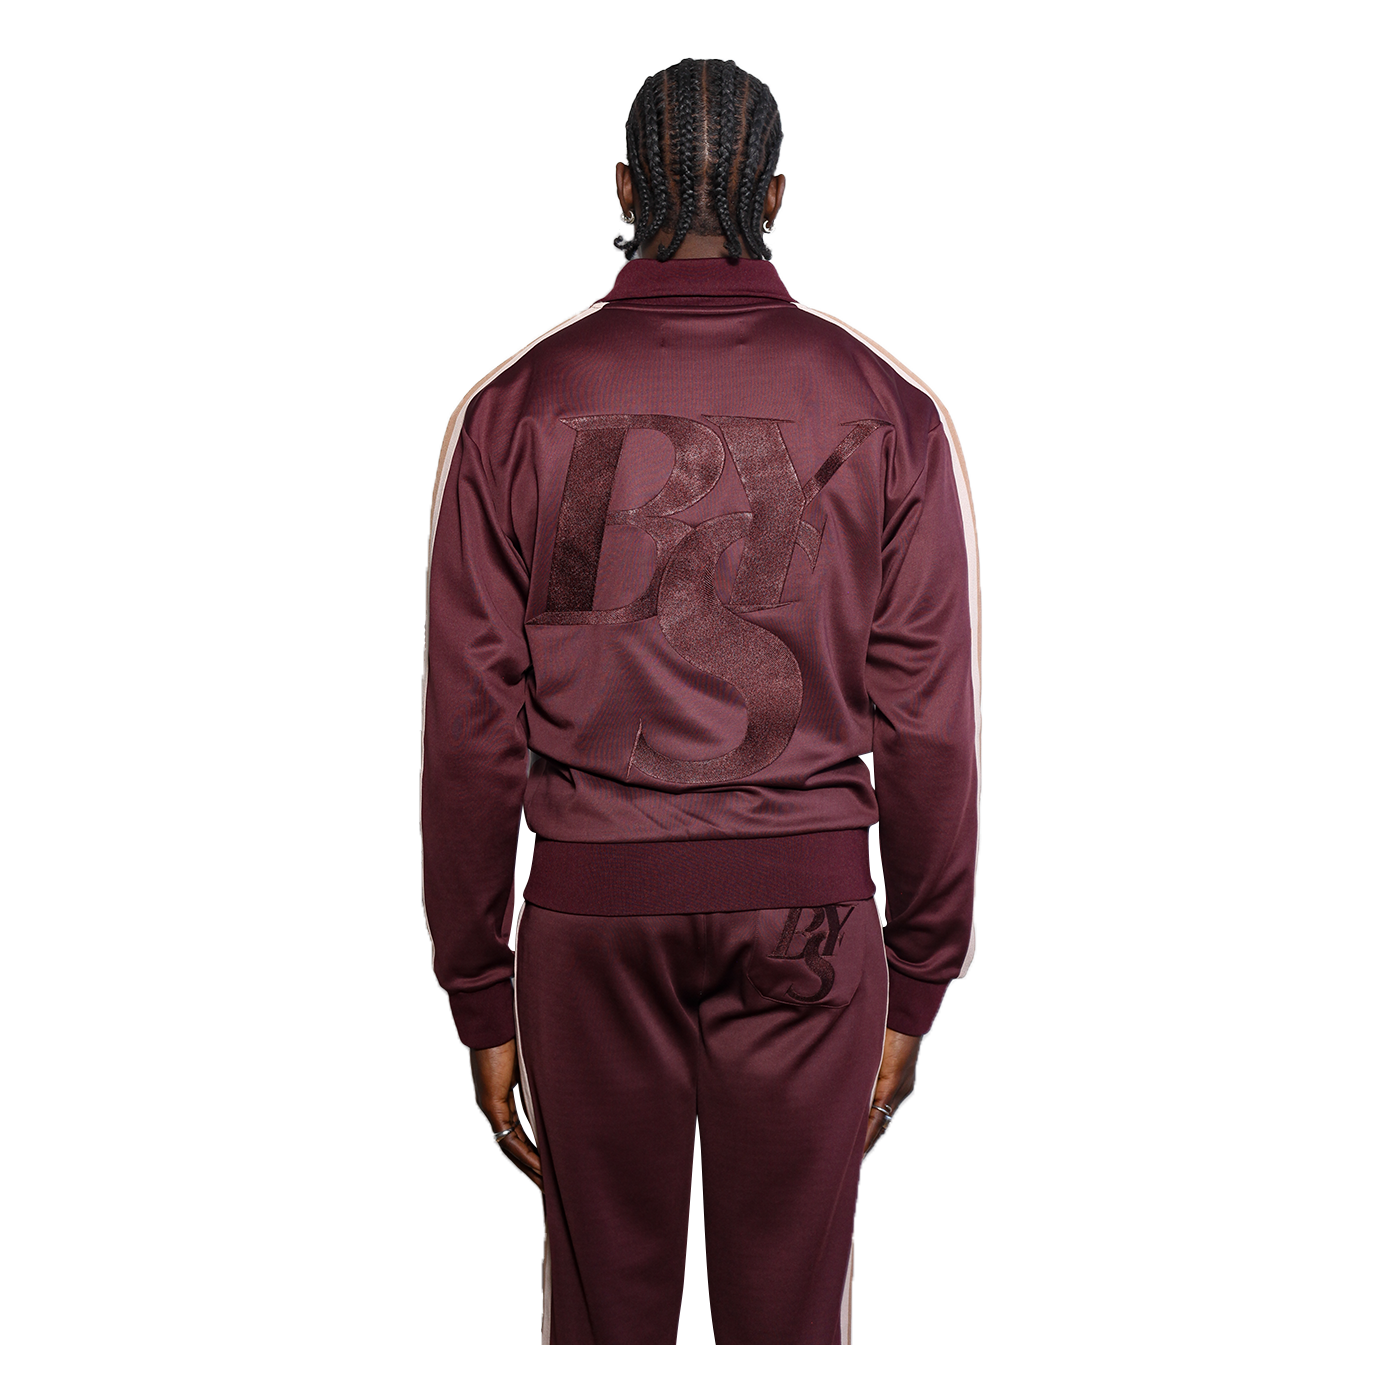 Uptown Track Jacket - Bordeaux (Ships in 7-10 working days)